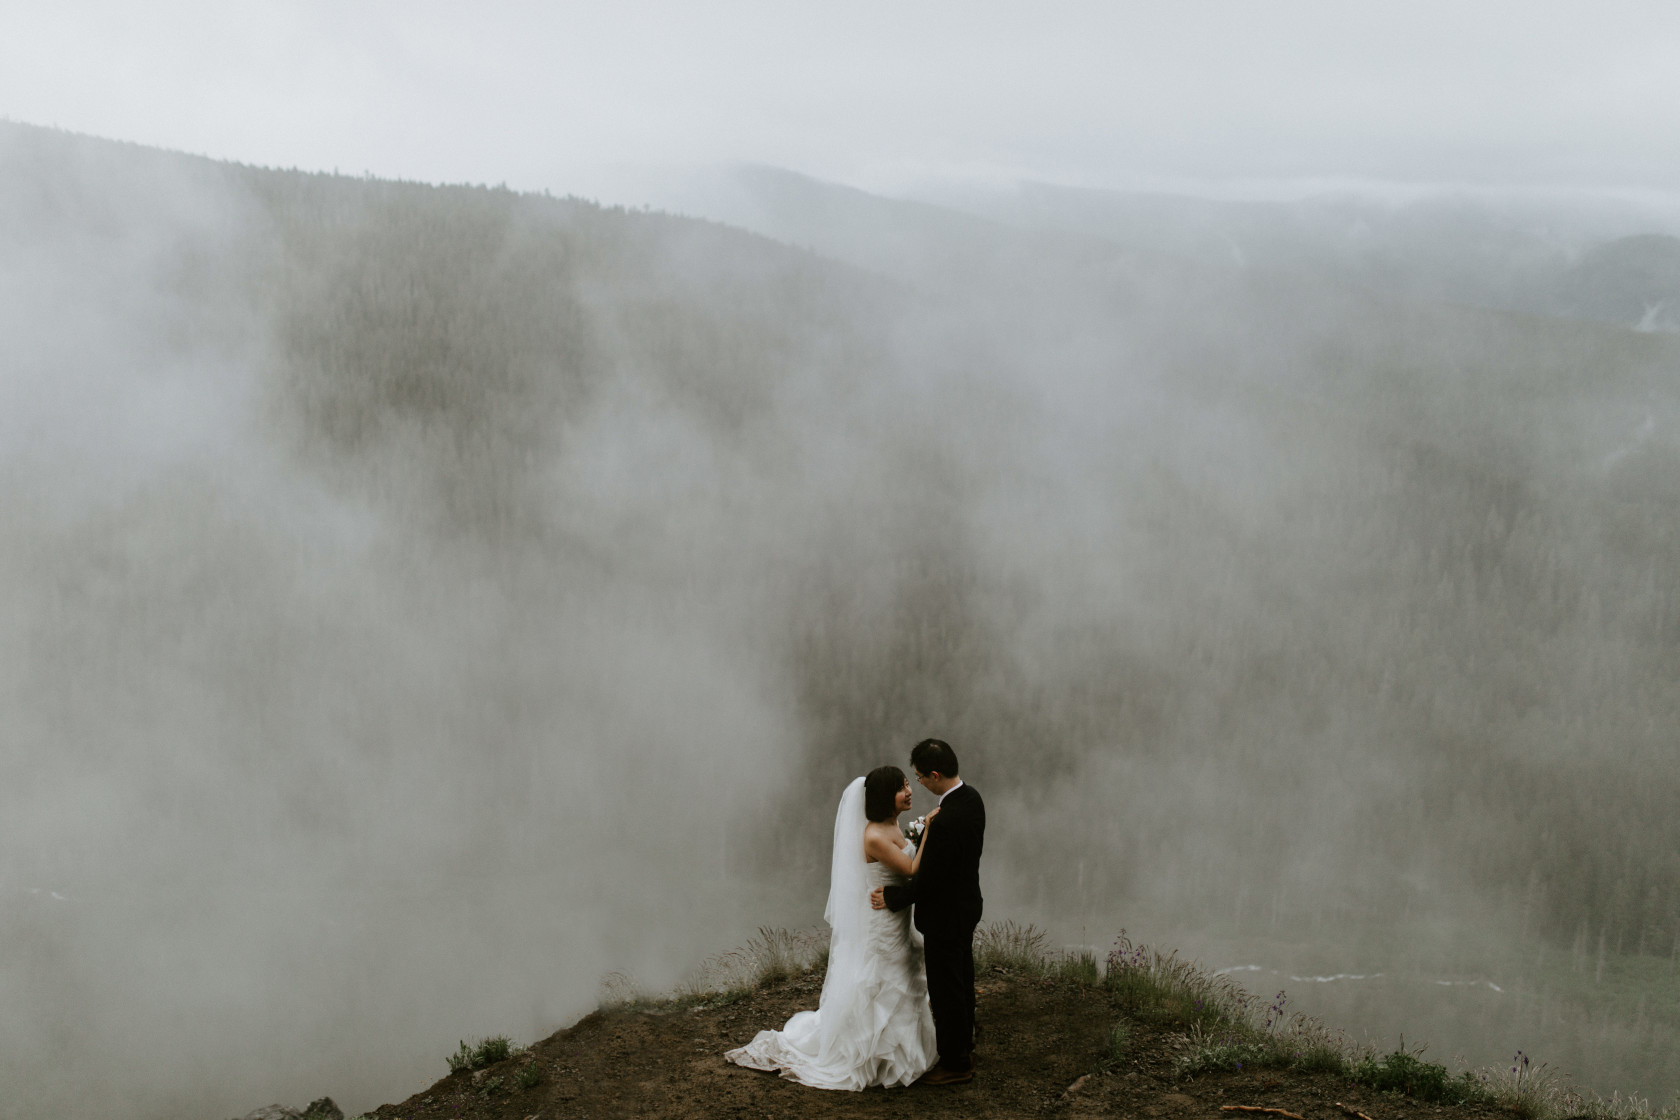 Alex and Valerie stand before the fog. Elopement wedding photography at Mount Hood by Sienna Plus Josh.